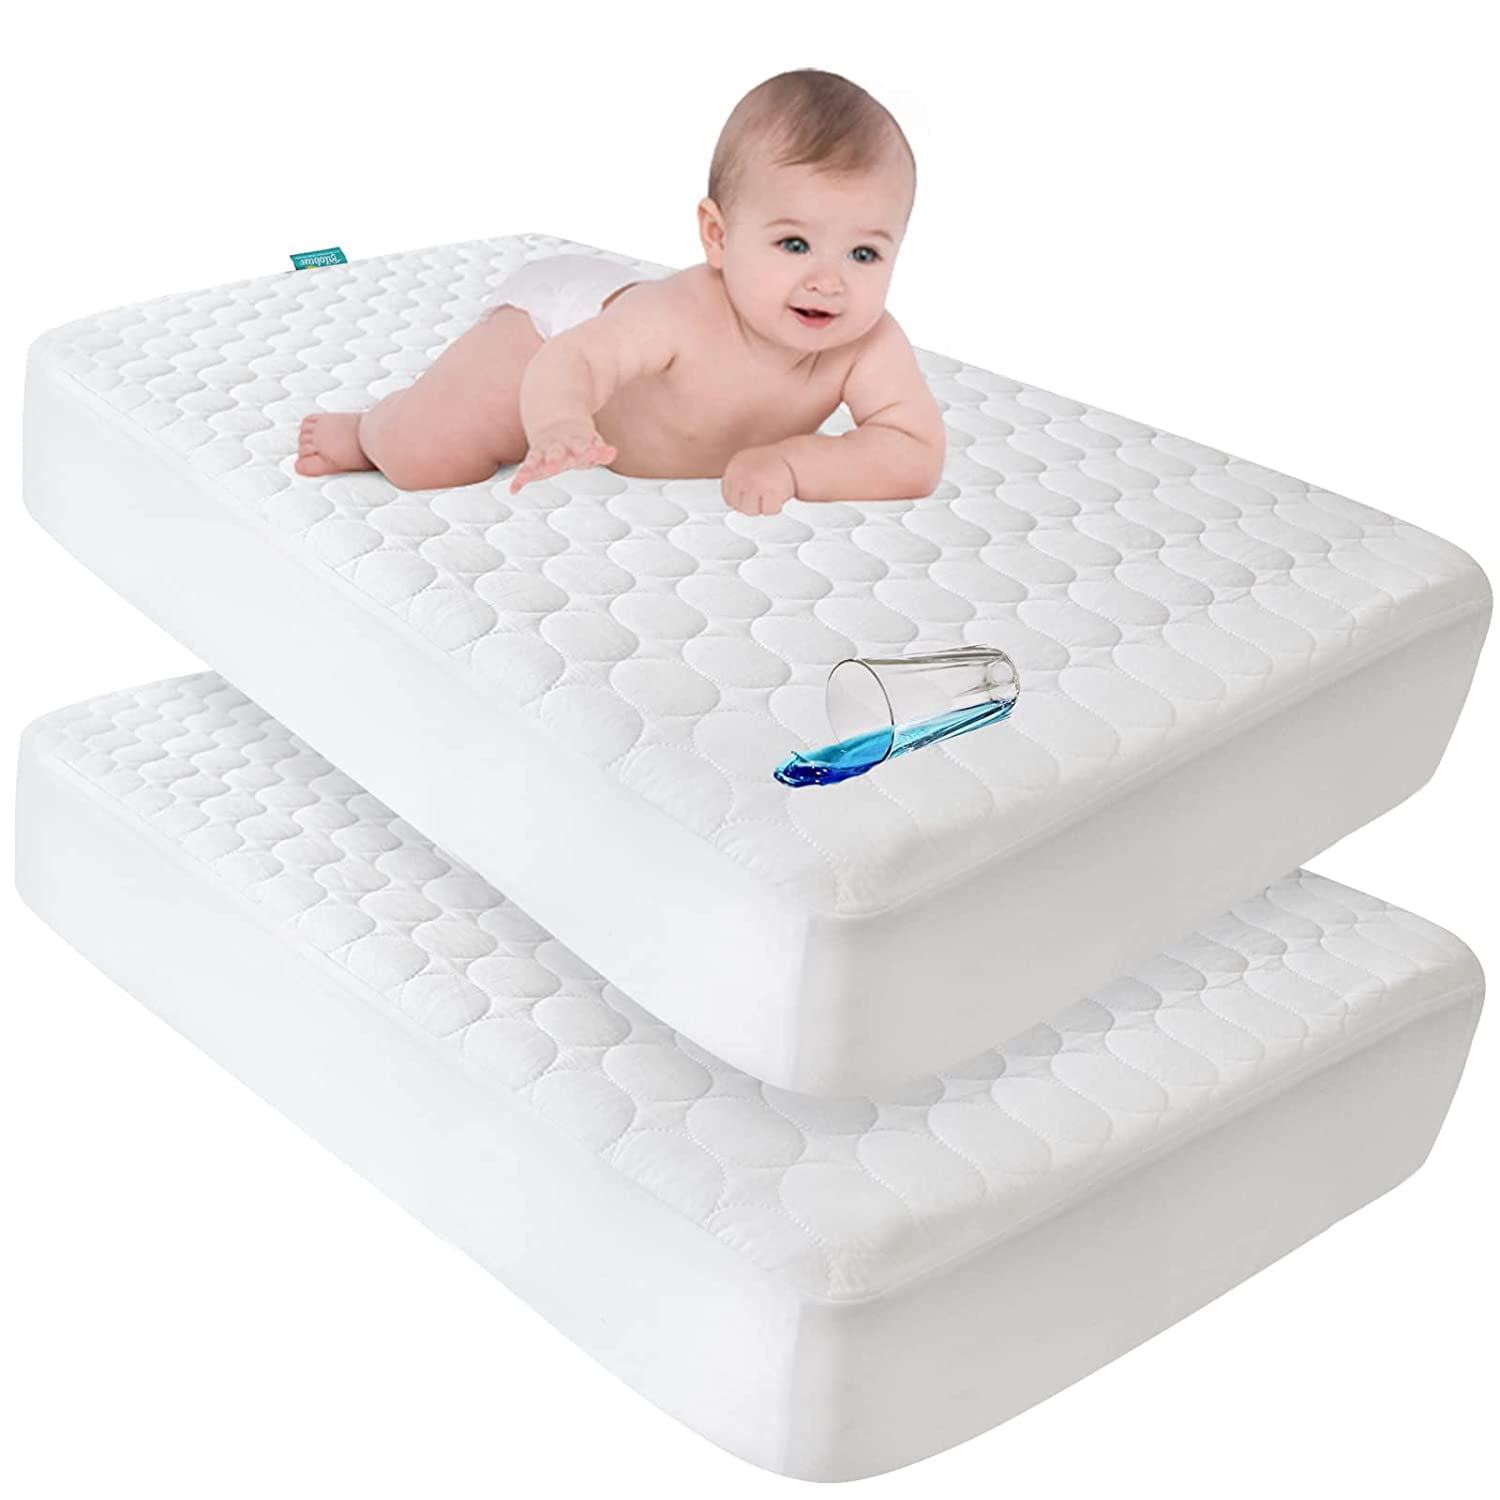 COZUMO Waterproof Bed Pad Baby Bed Pad Baby Organic Waterproof Bed Pad Toddler Dry Mat for Babies Waterproof Baby Blanket Baby Water Proof Bed Pad